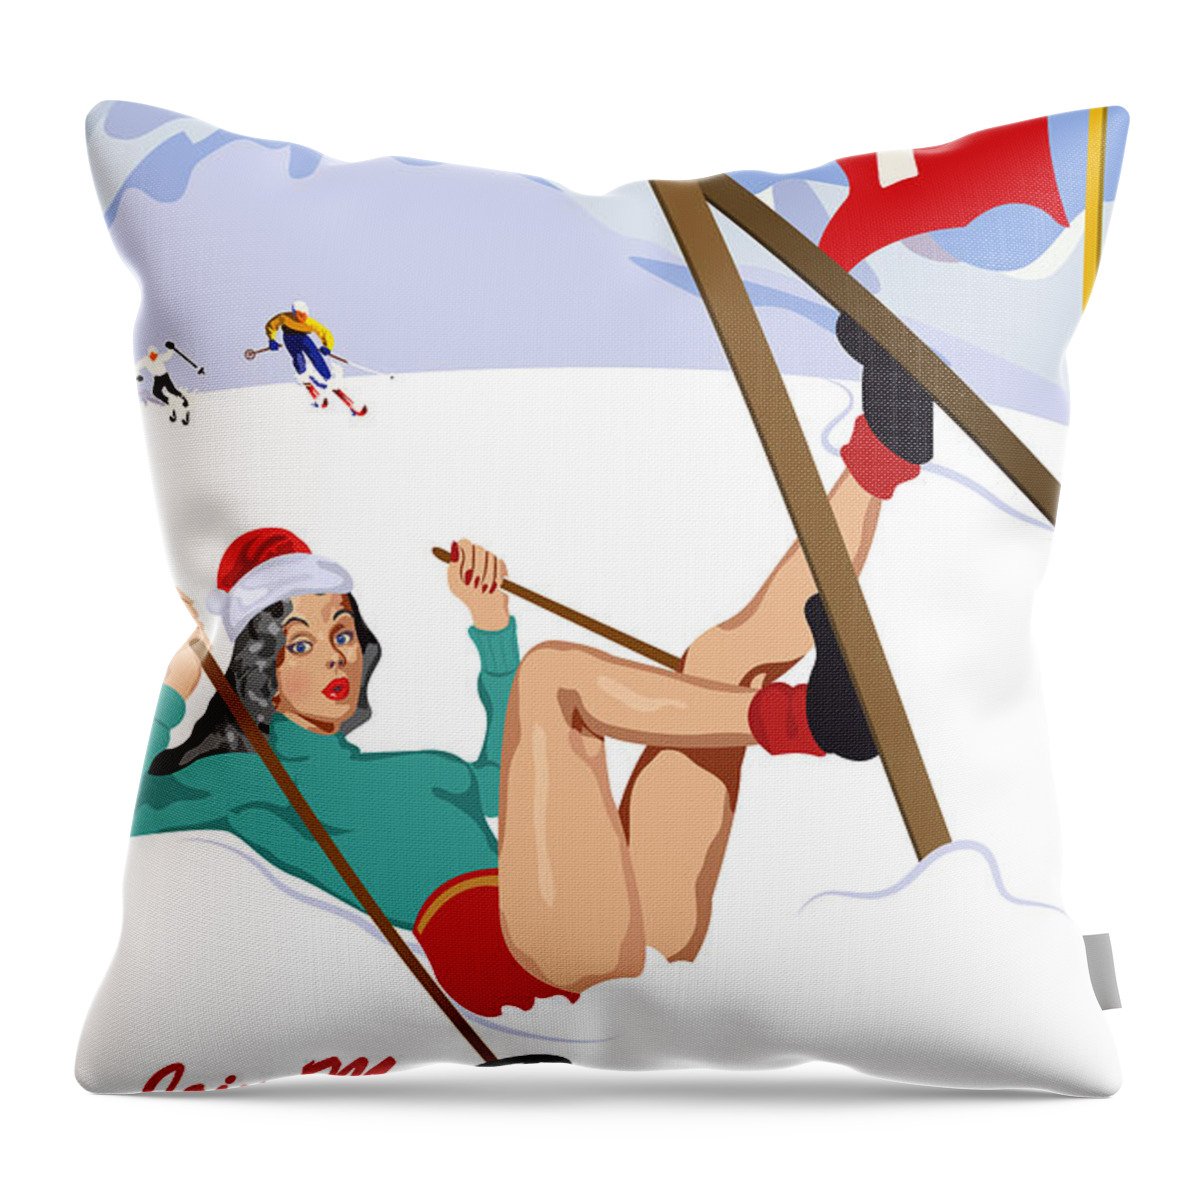 Sexy Throw Pillow featuring the digital art Pin-up girl on Ski School Accident by Long Shot